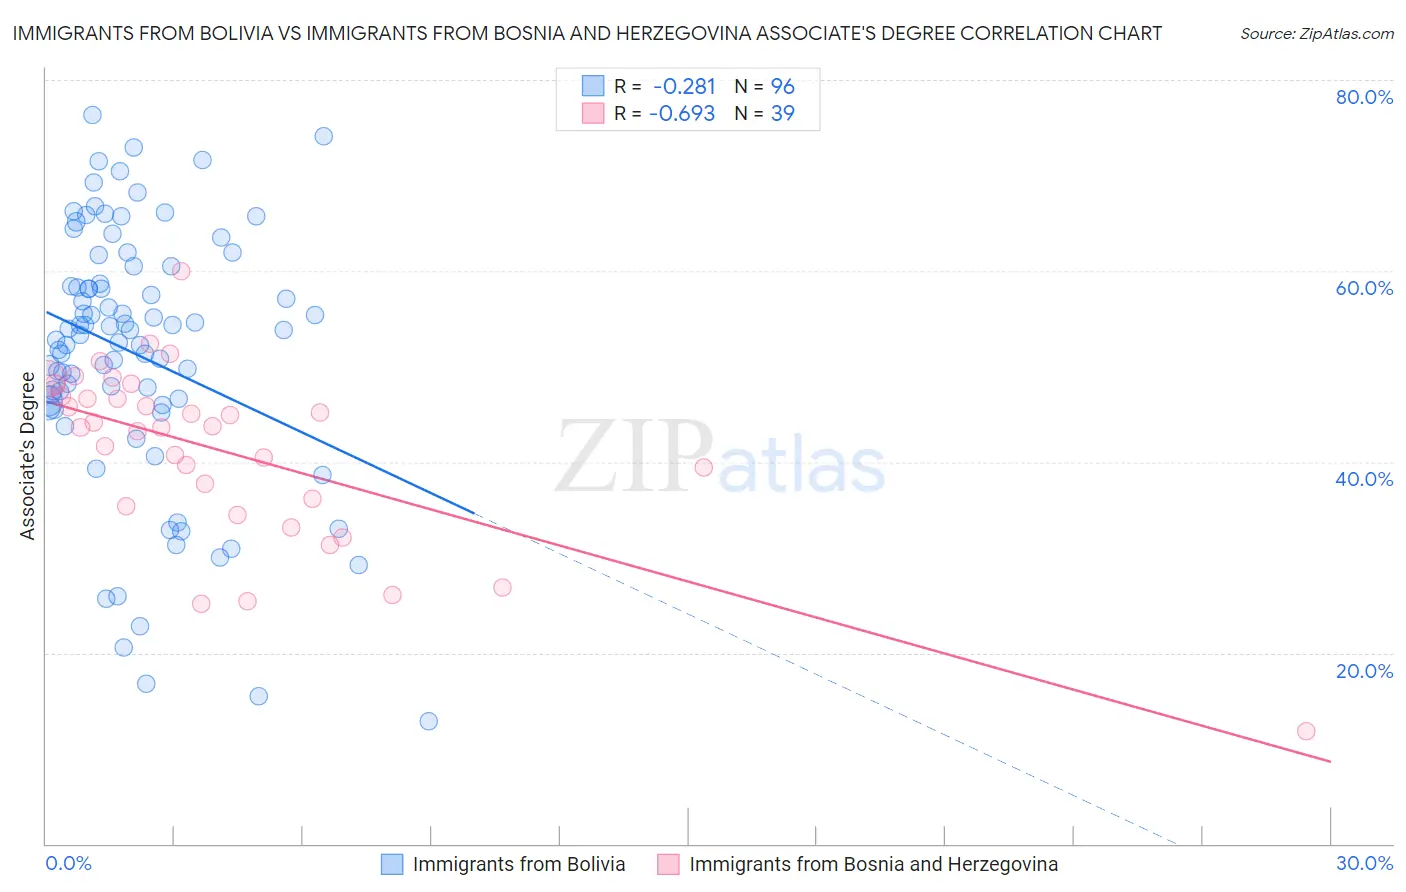 Immigrants from Bolivia vs Immigrants from Bosnia and Herzegovina Associate's Degree